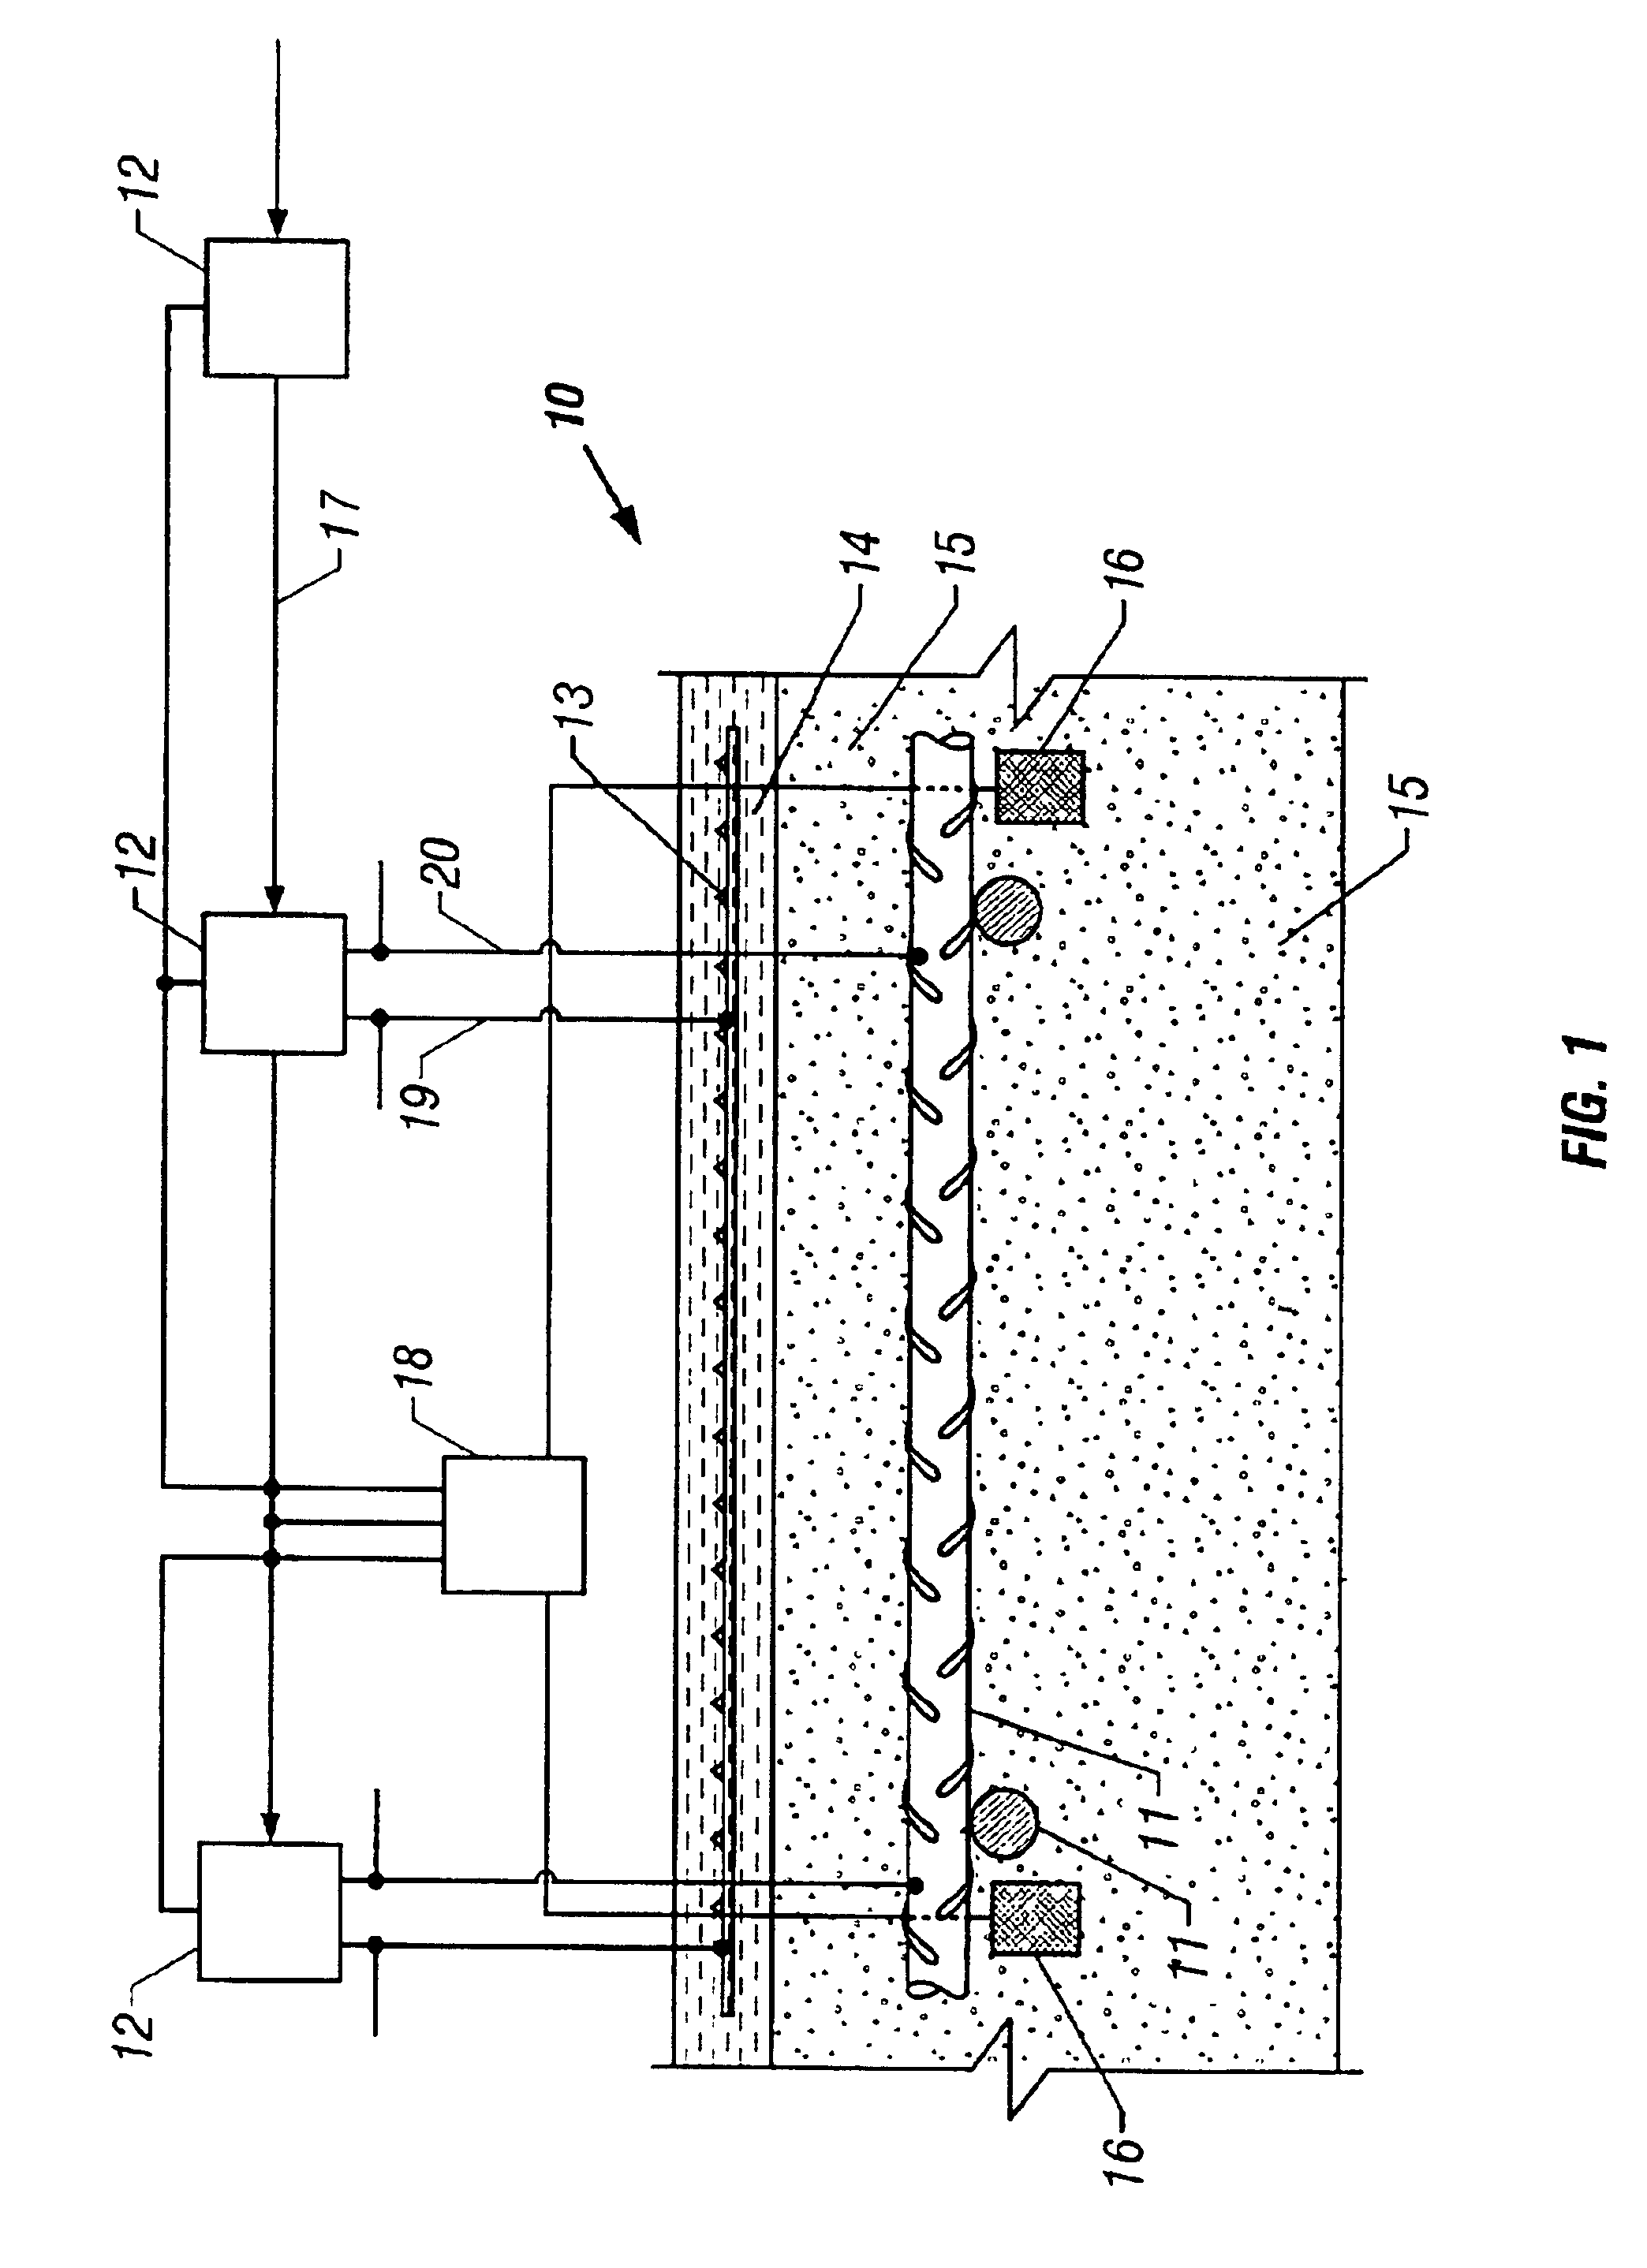 Method of treating corrosion in reinforced concrete structures by providing a uniform surface potential